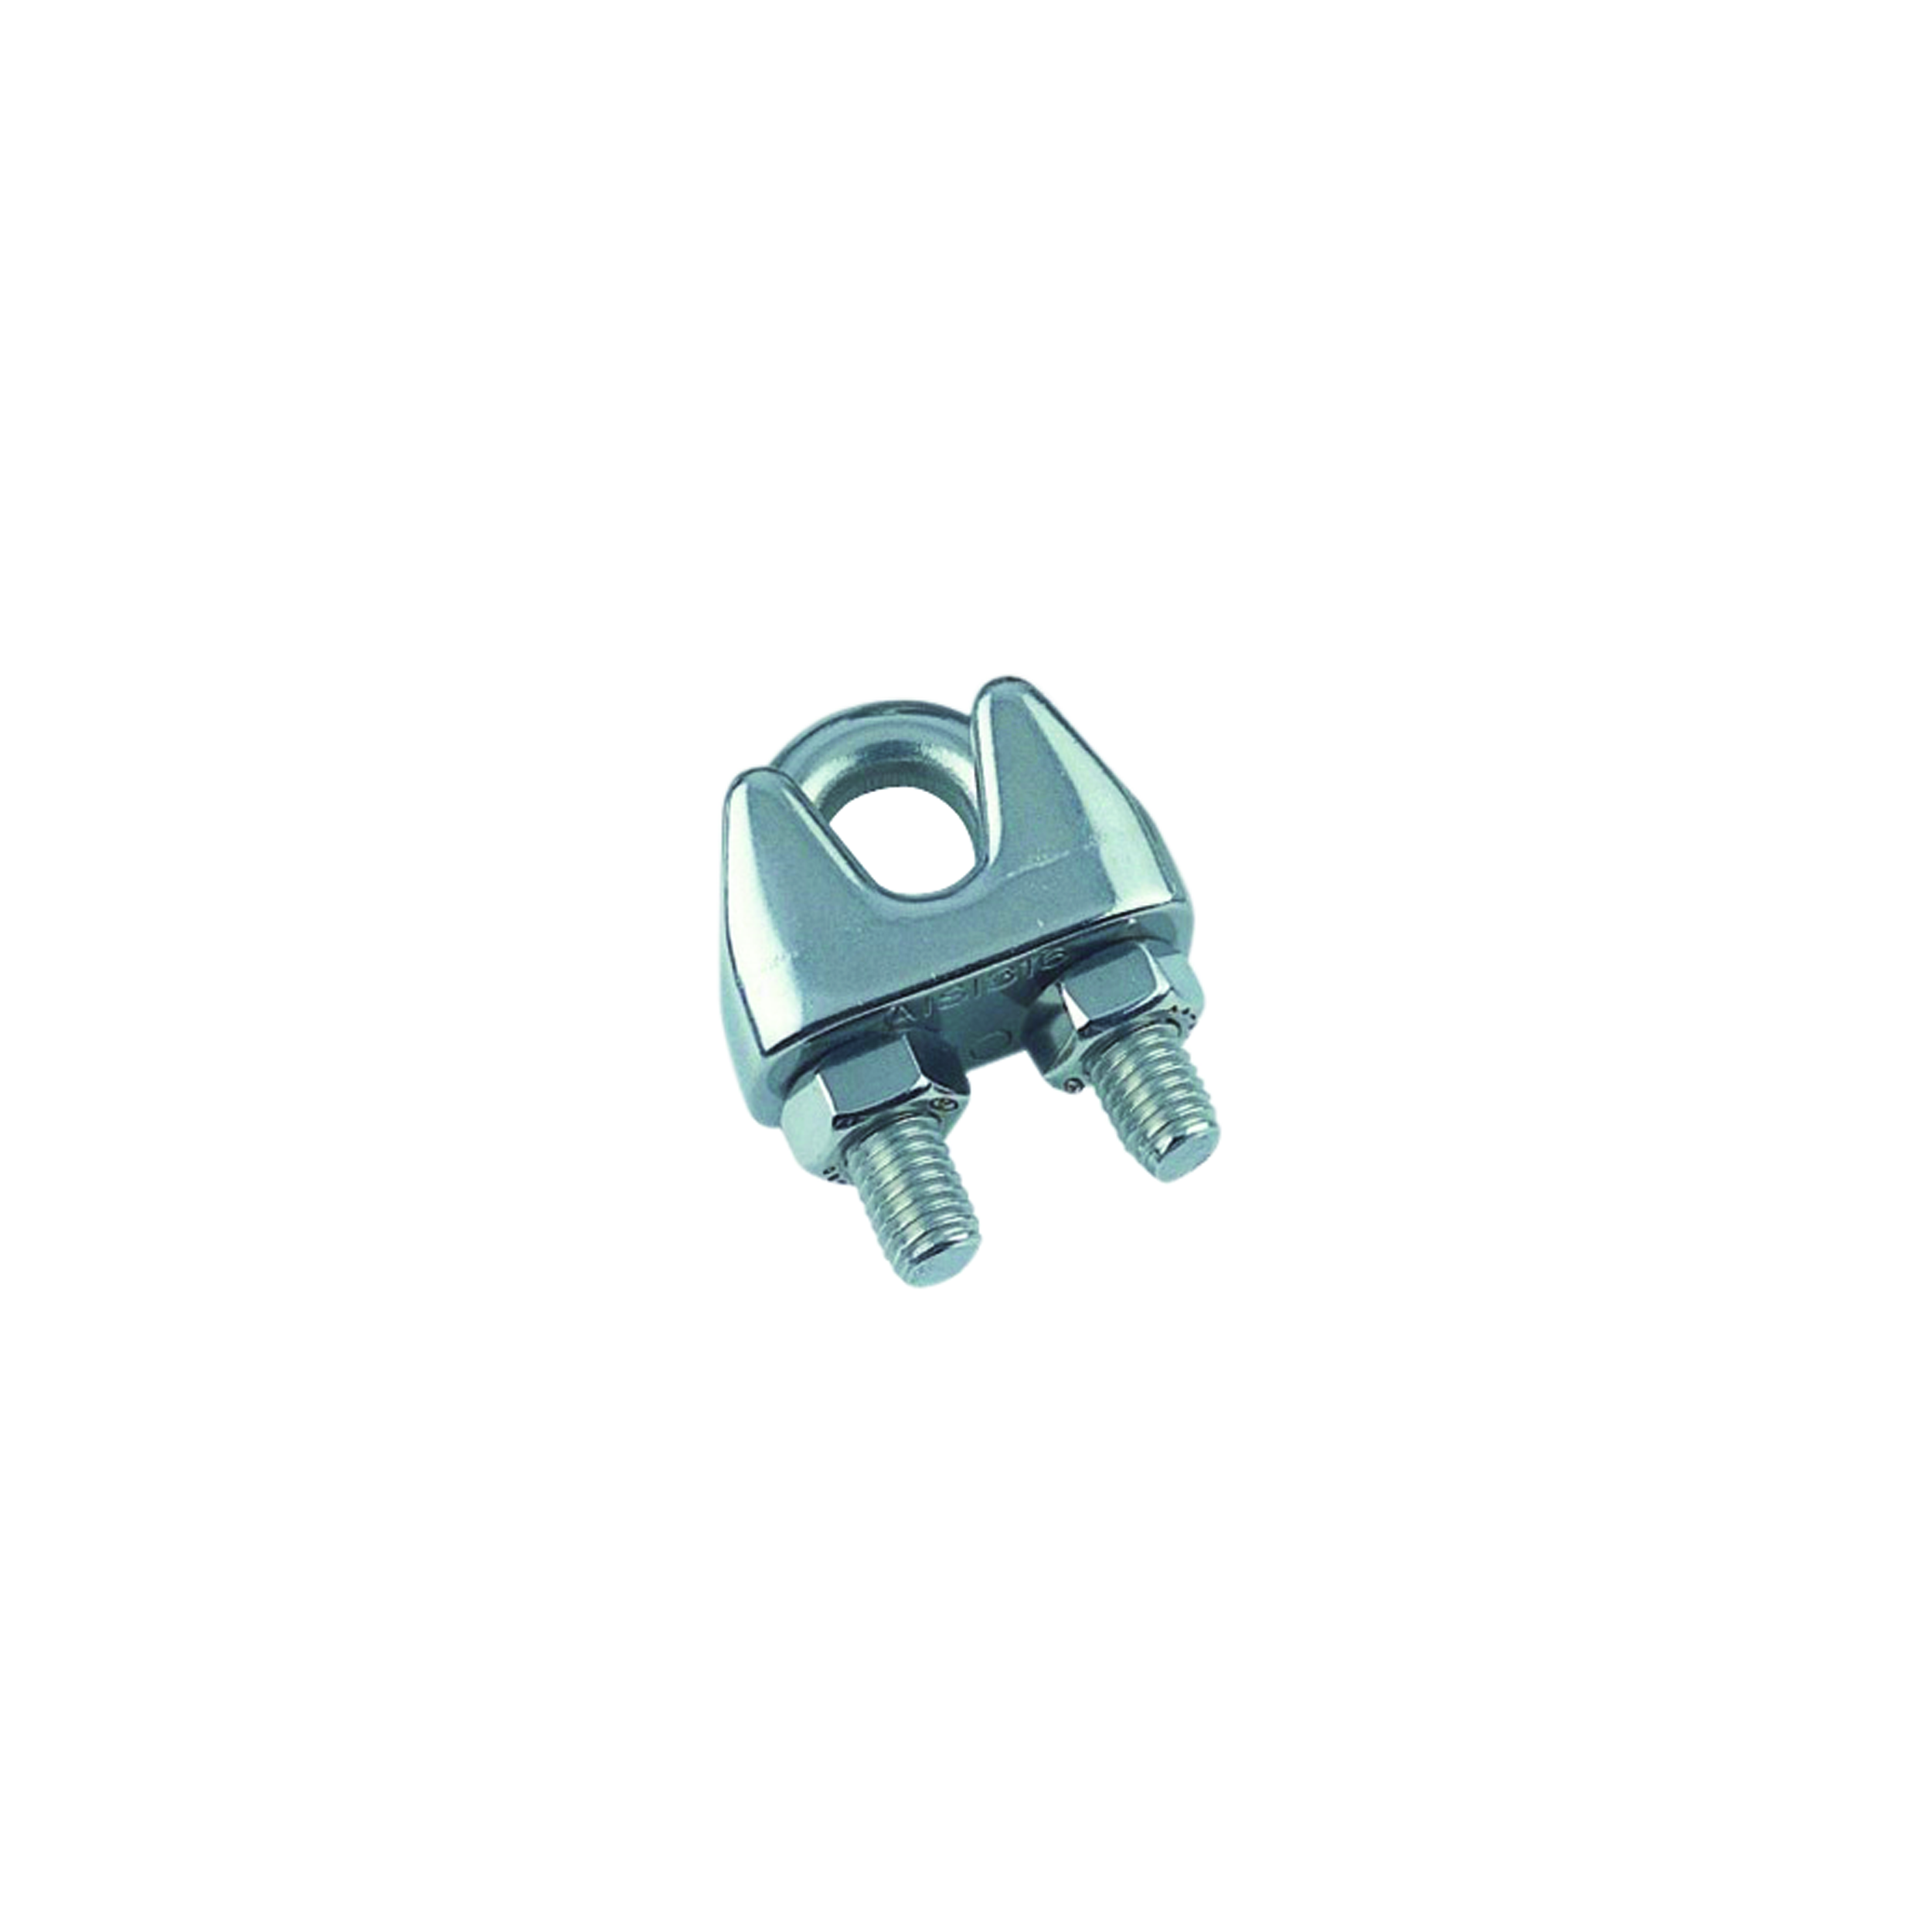 50 STCK / PCS. Wire rope clip A4  3mm